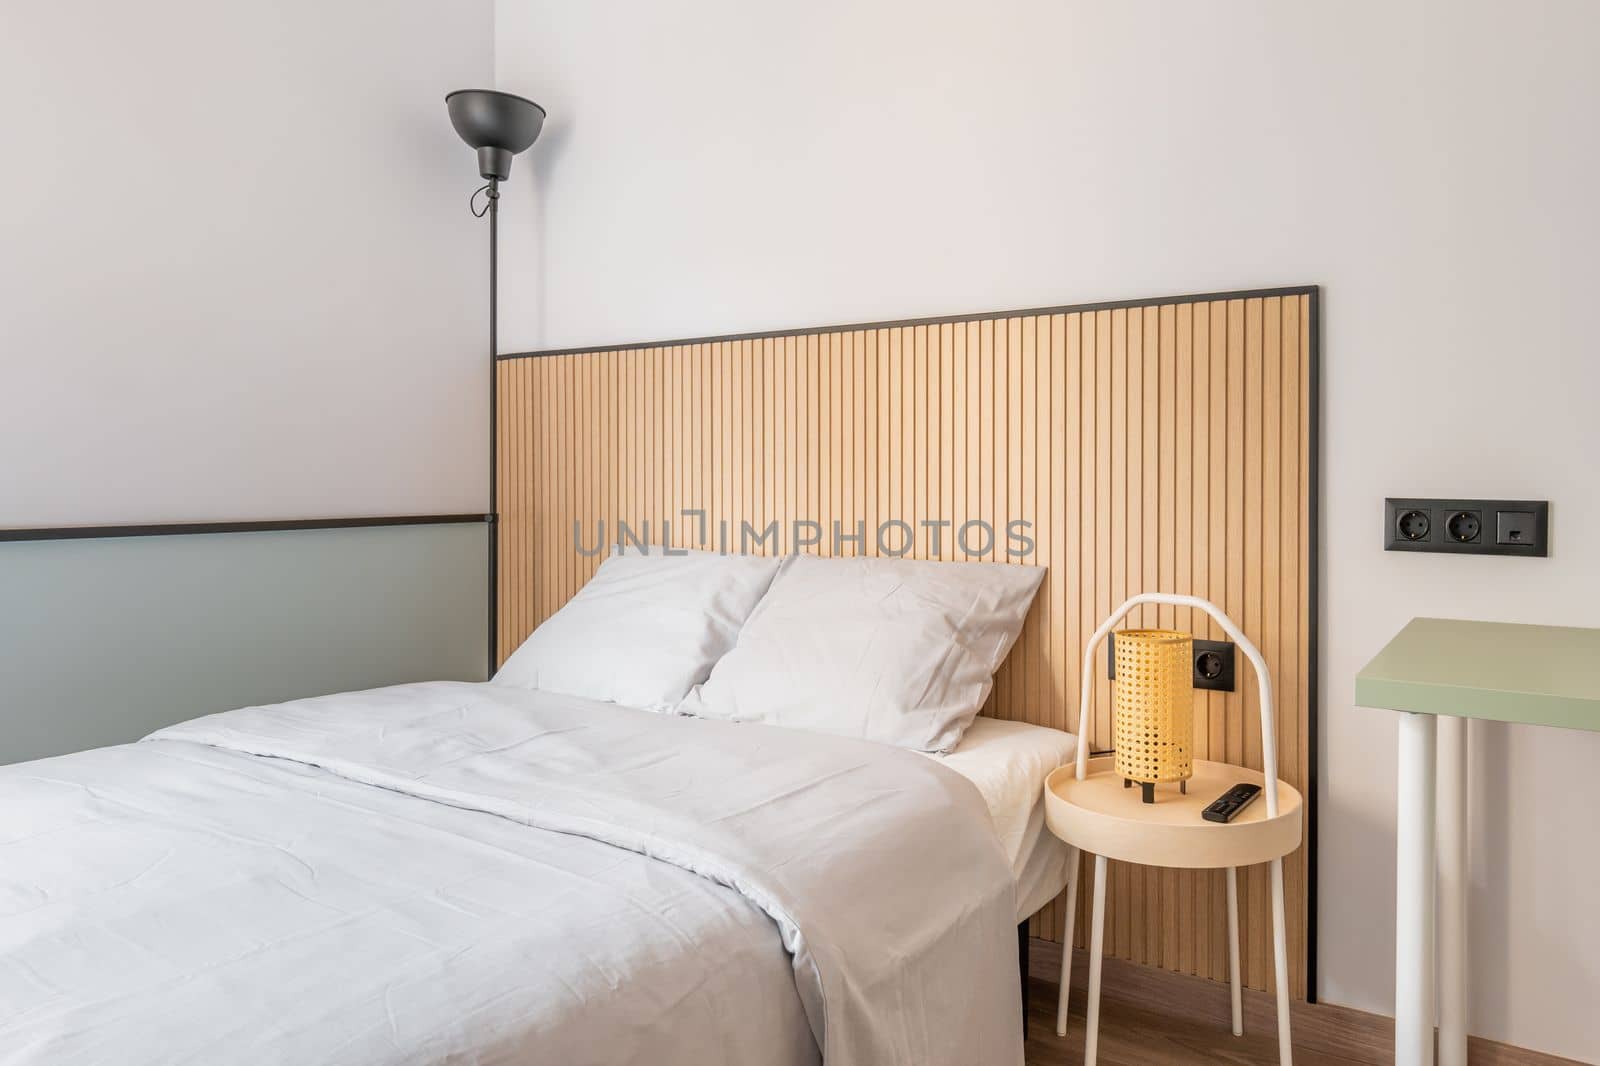 Part of a bedroom with a double bed against a white wall with designer wooden elements. Floor lamp with black metal shade in the corner. On the bedside table is a night lamp with a yellow shade. by apavlin